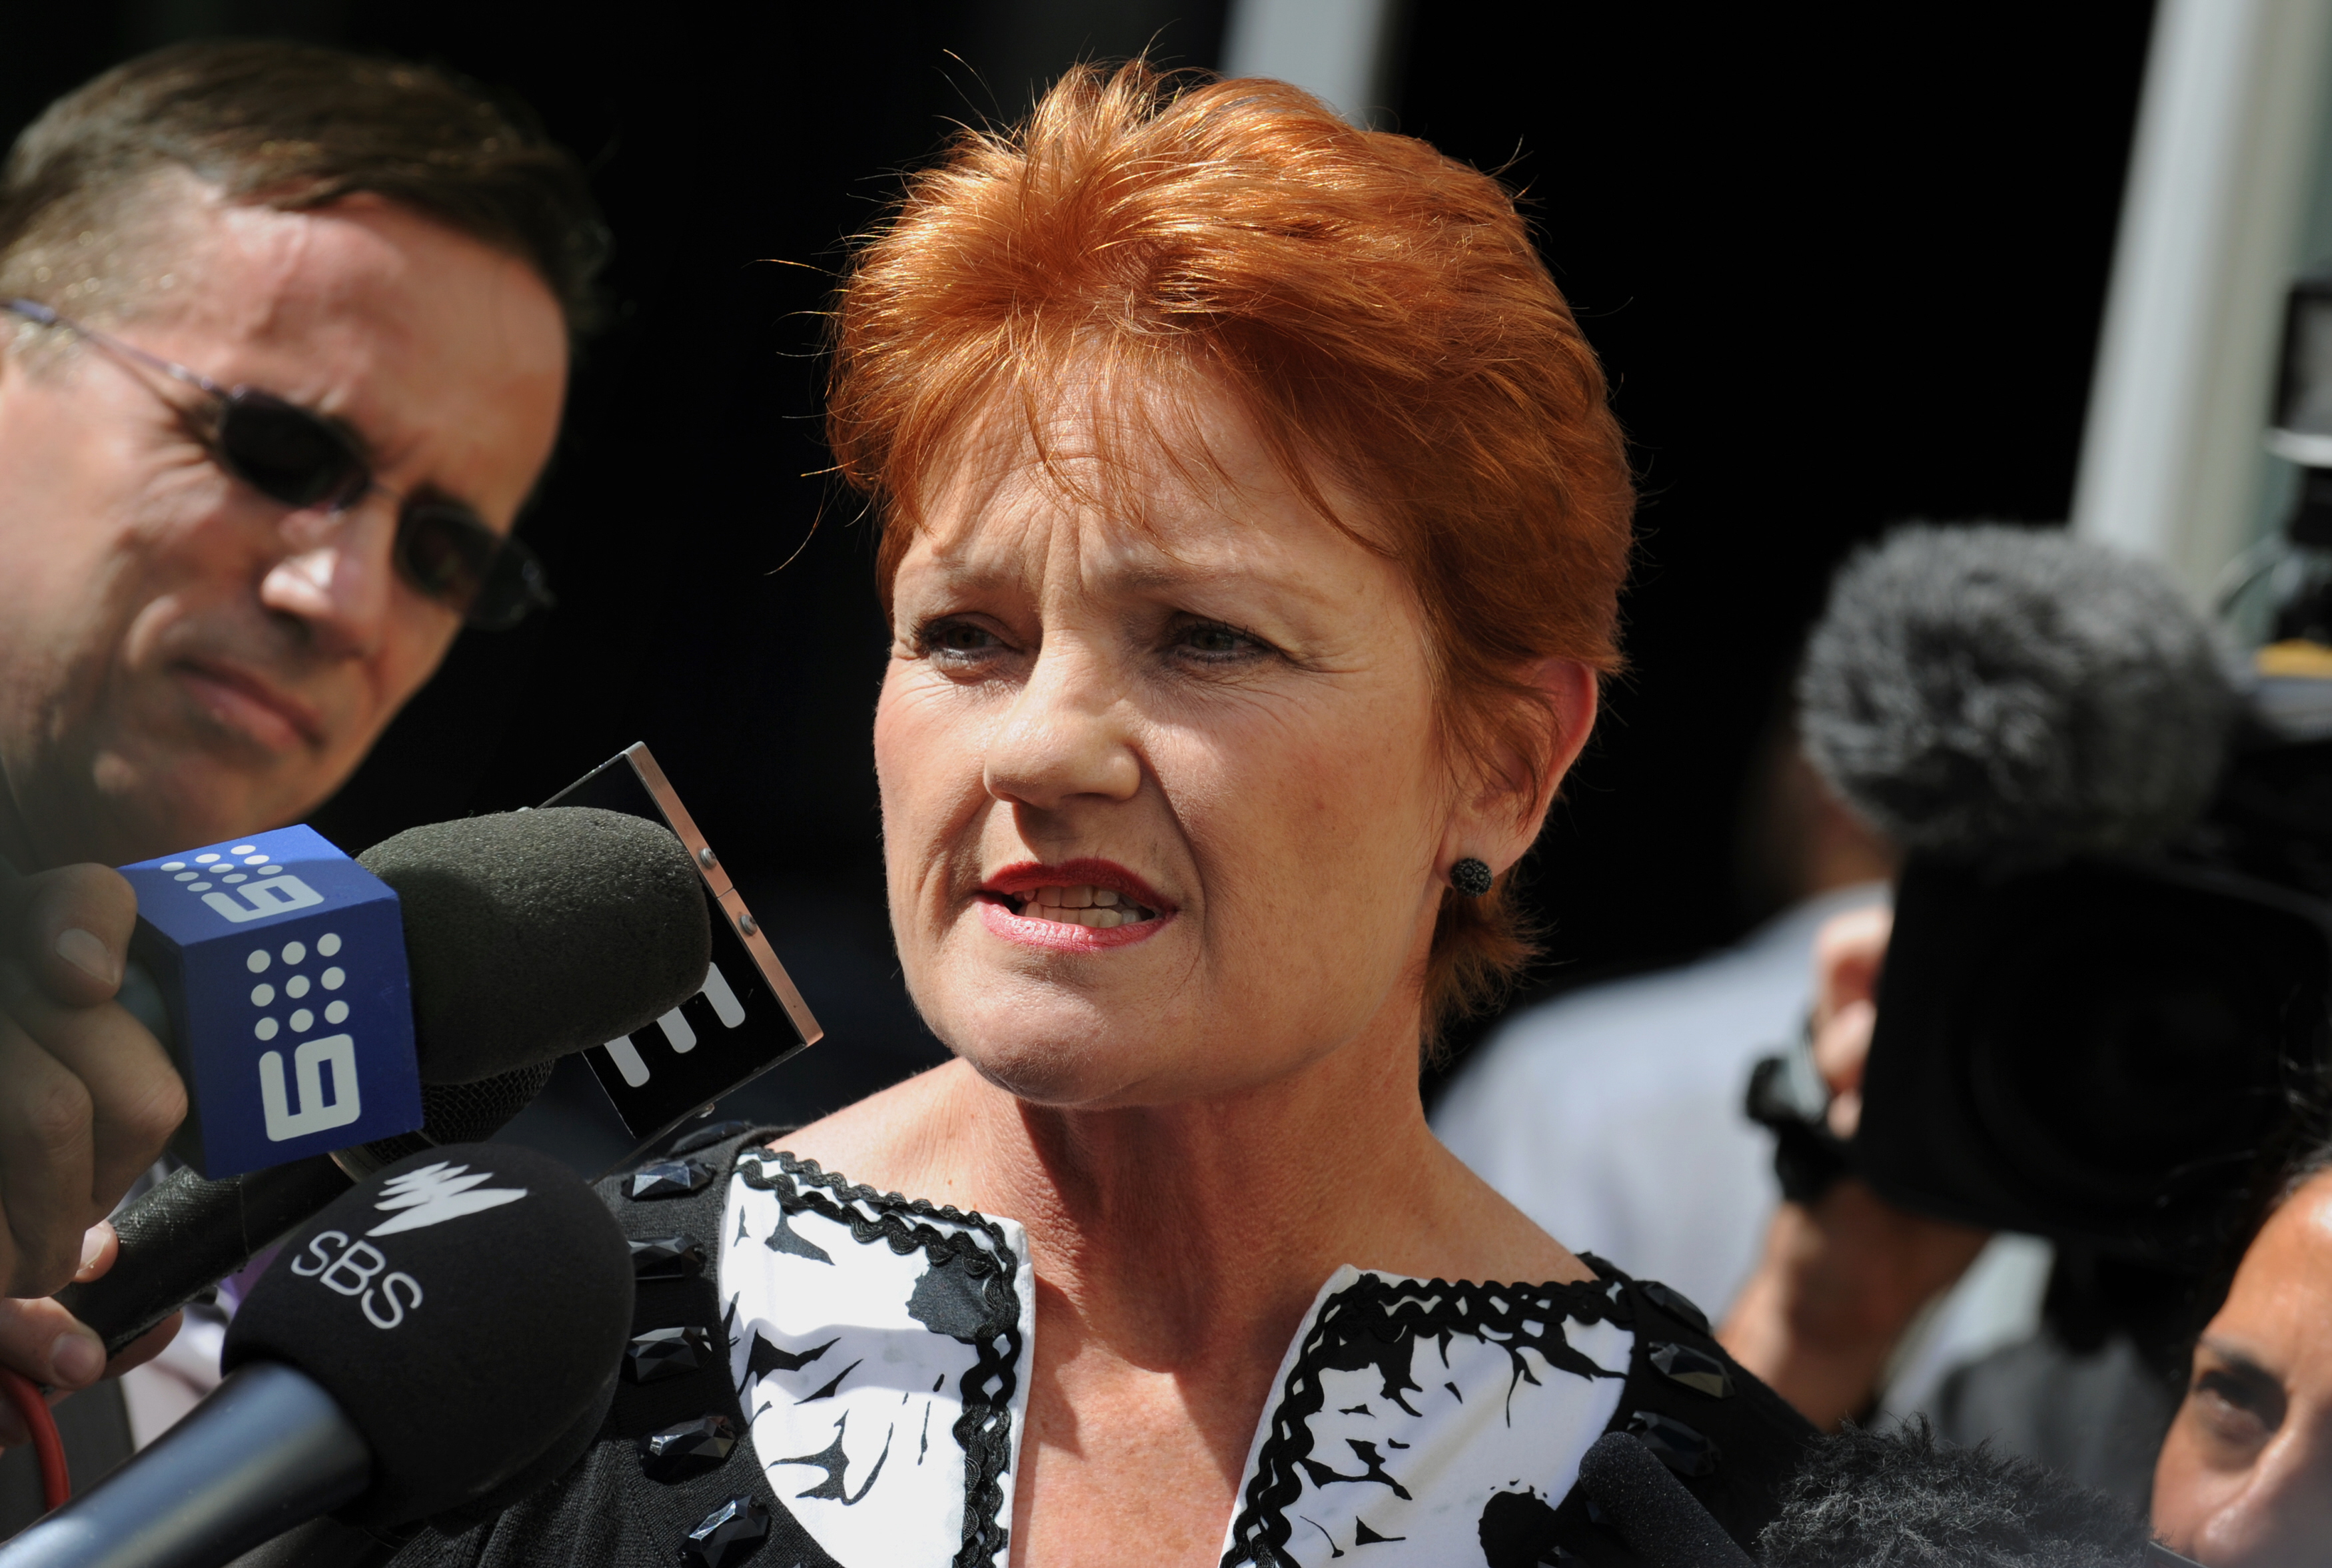 Australian politician Pauline Hanson speaks to the media in Sydney on April 12, 2011, after narrowly failing in her bid to win a seat in the New South Wales parliament (Greg Wood—AFP/Getty Images)